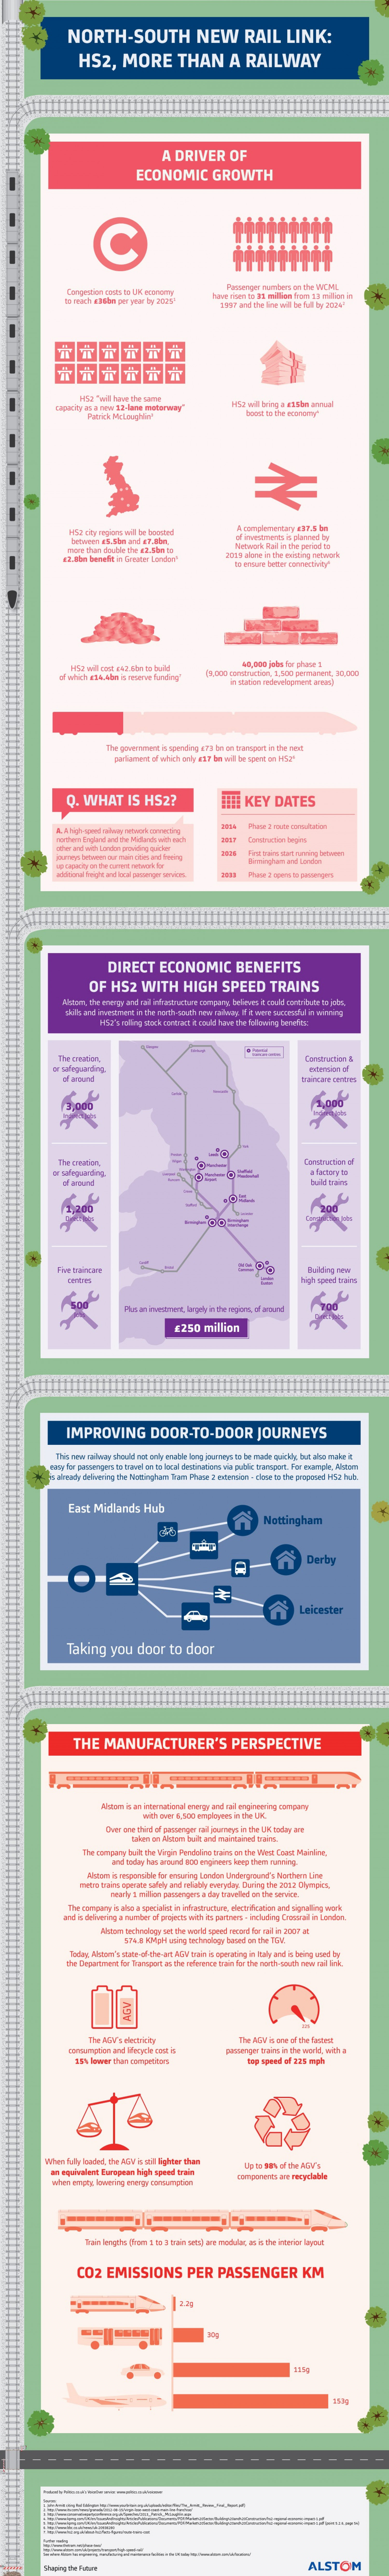 North-South new rail link: HS2, more than a railway Infographic